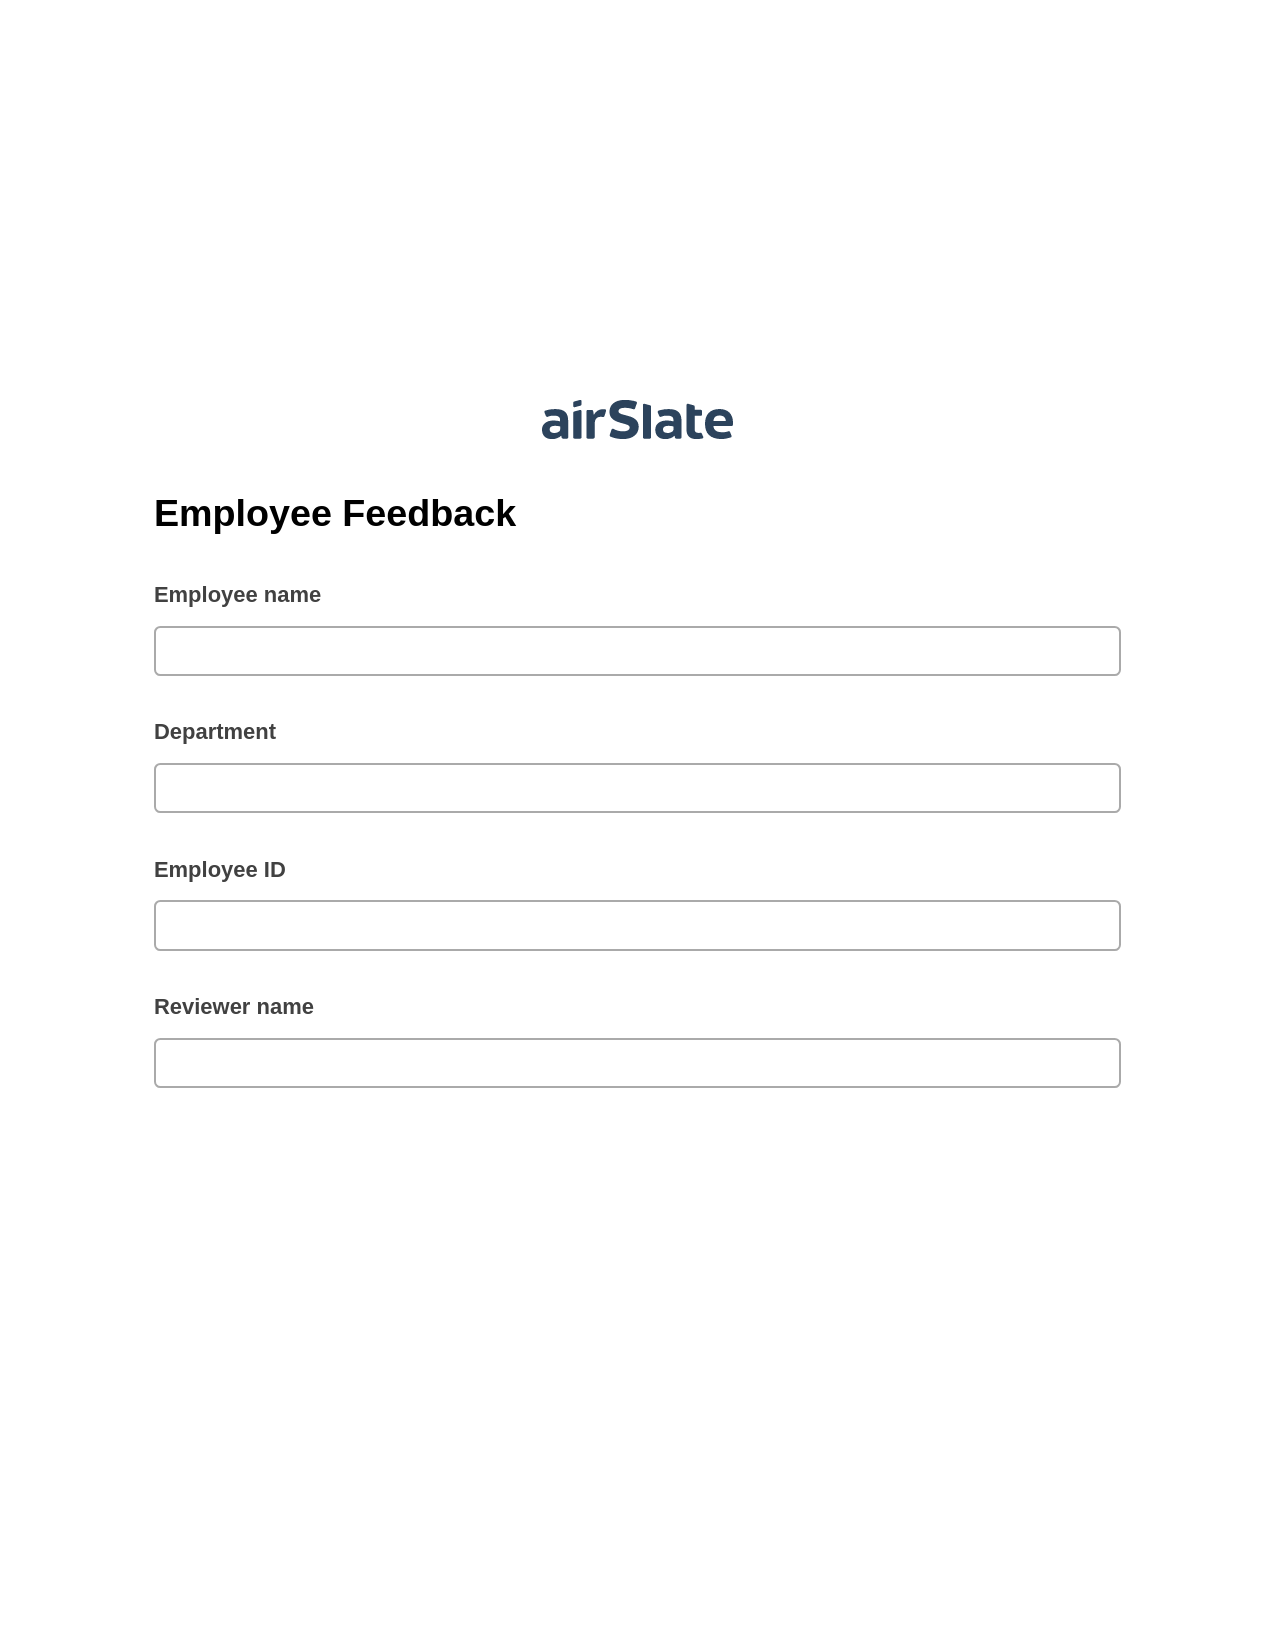 Employee Feedback Pre-fill from Google Sheet Dropdown Options Bot, Send a Slate with Roles Bot, Text Message Notification Postfinish Bot